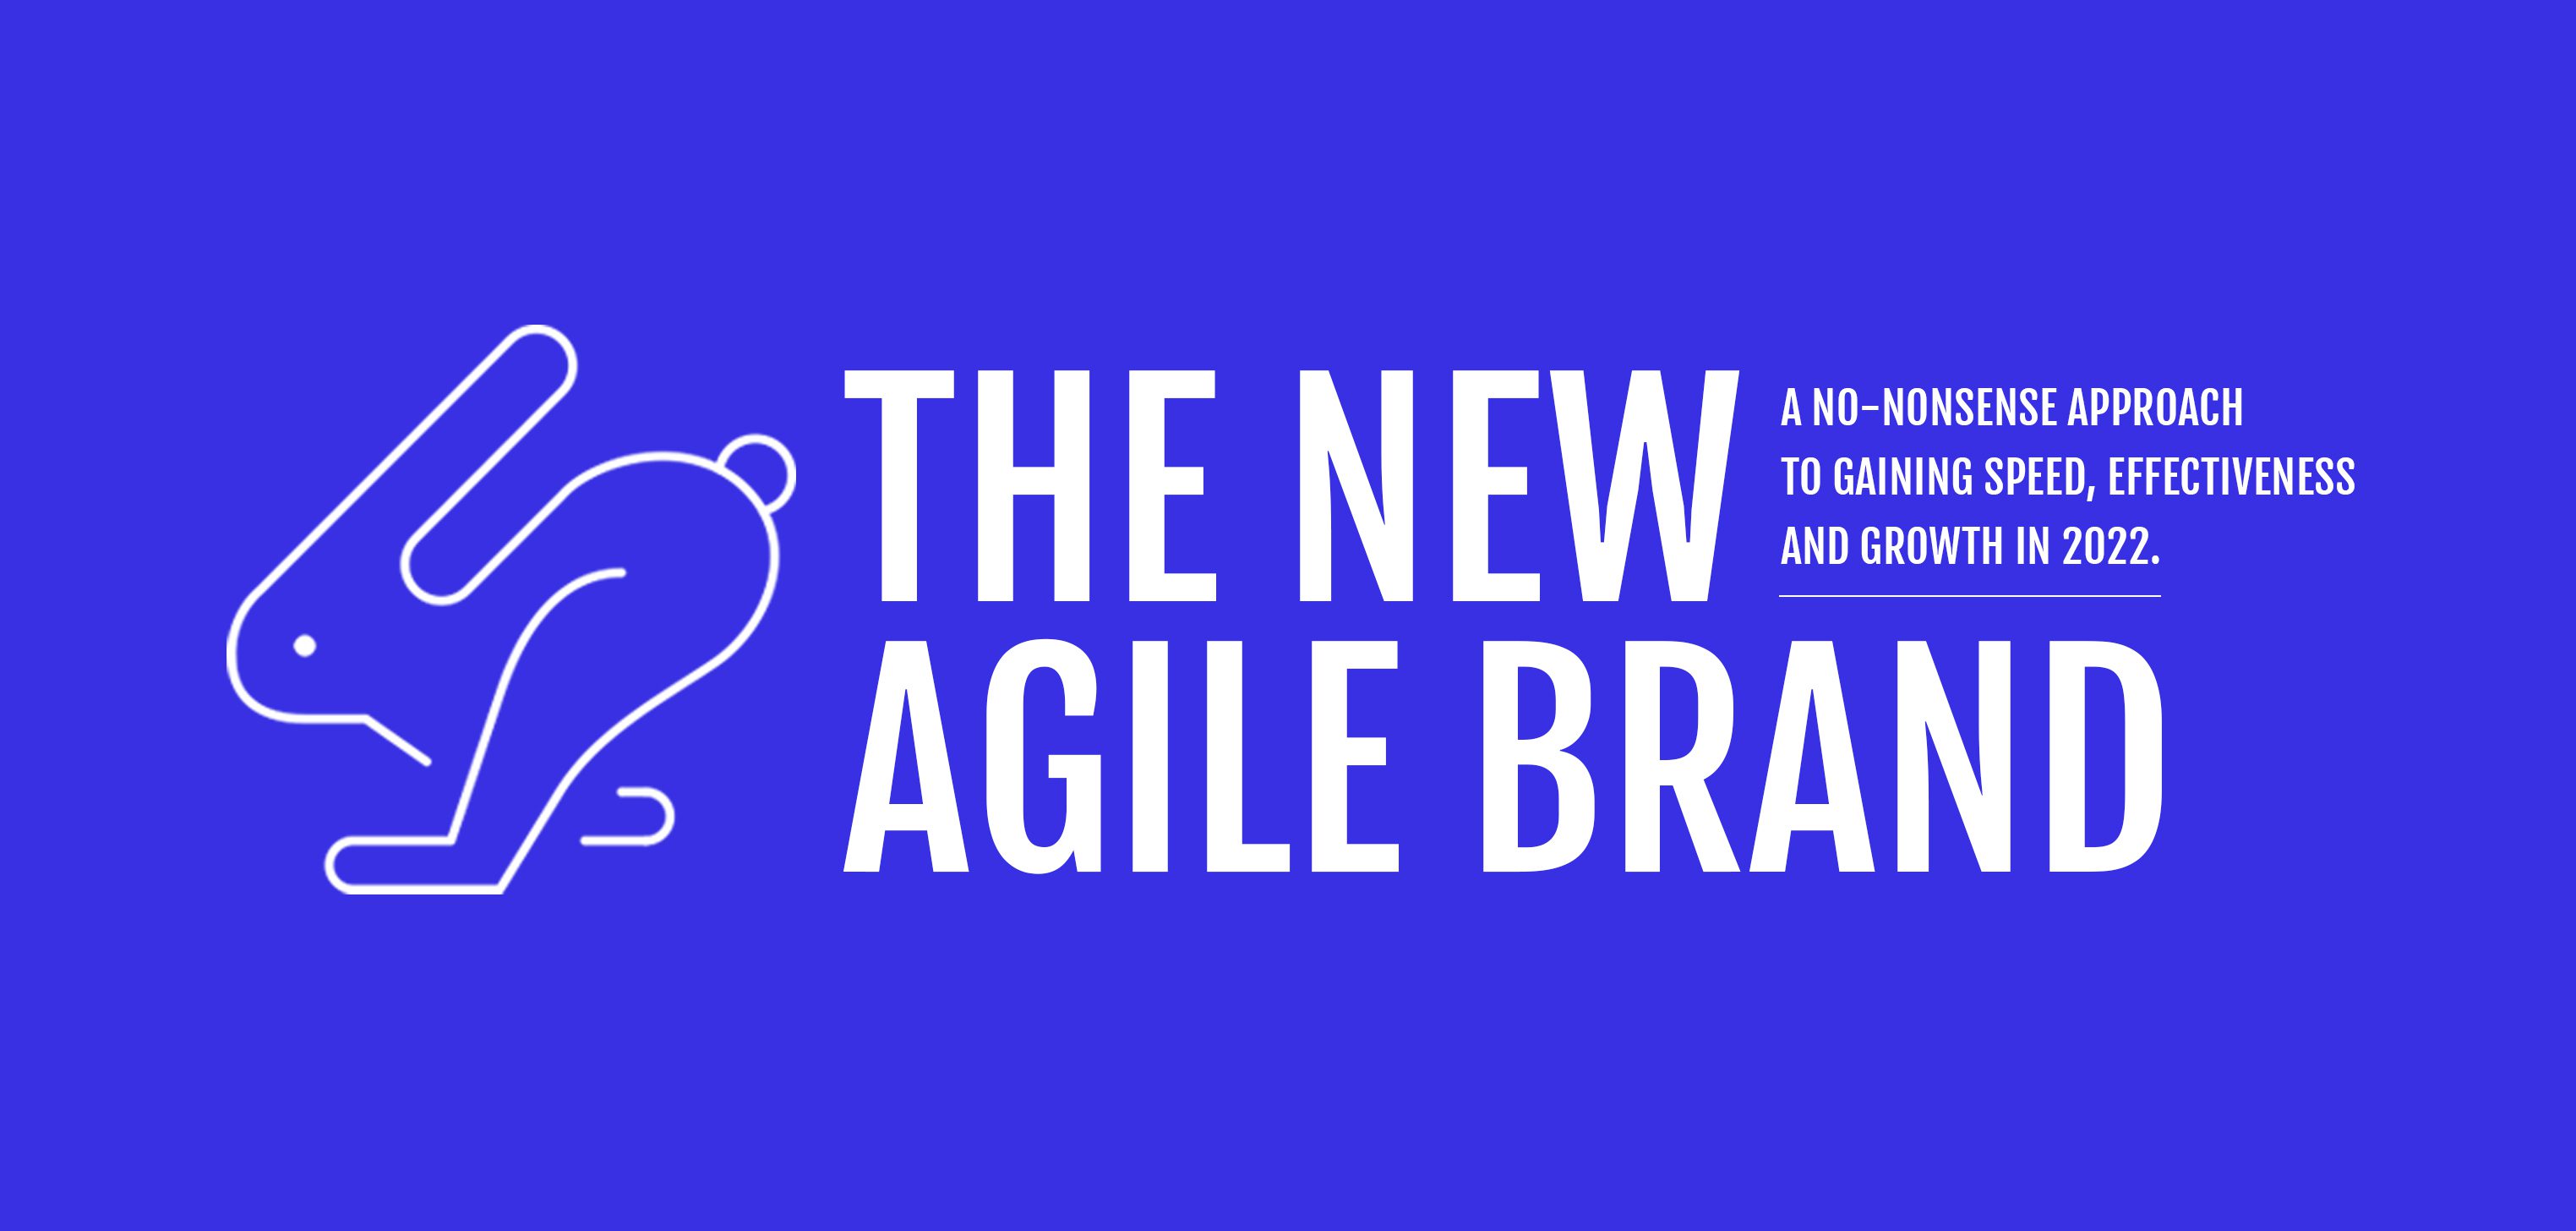 The Agile Brand '22, No-Nonsense, Speed, Effectiveness, Growth